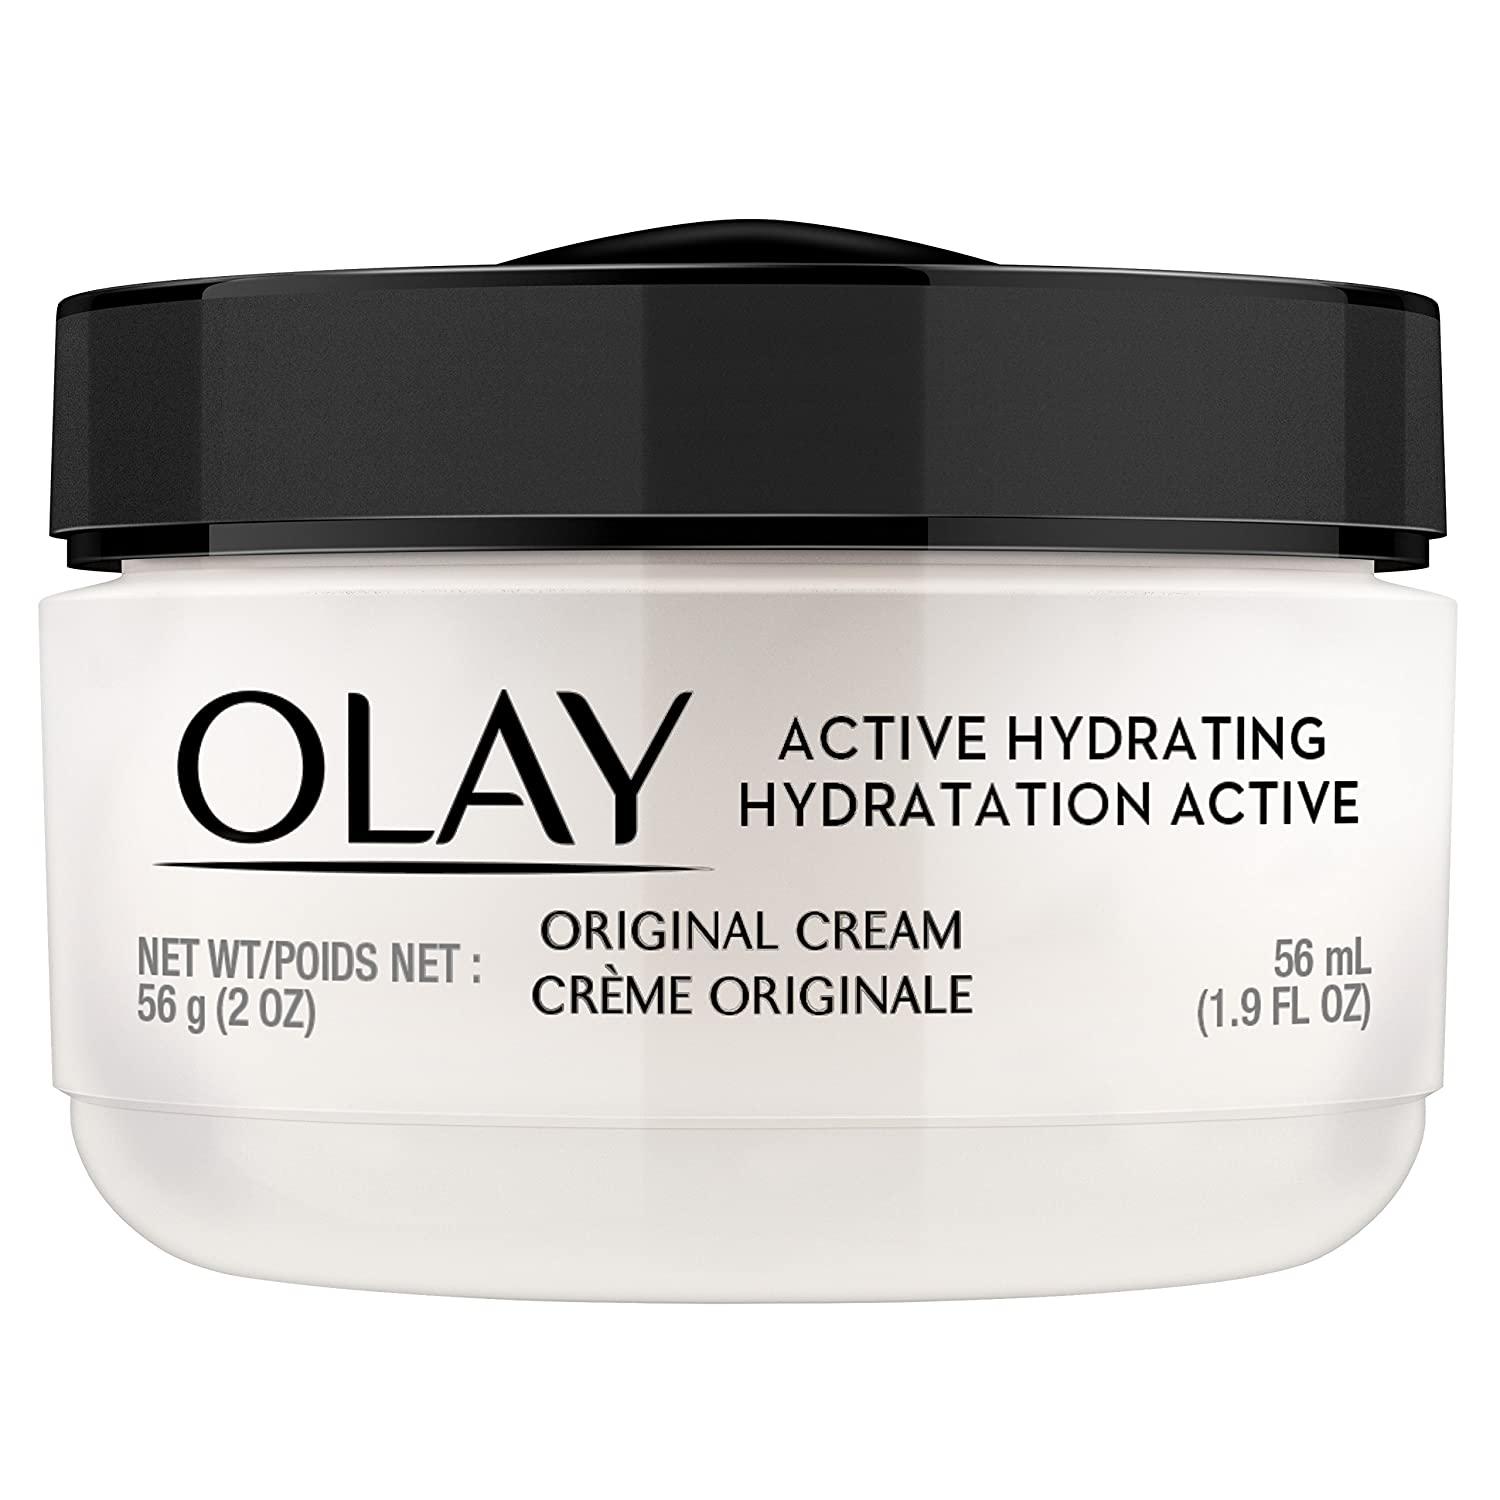 Olay Active Hydrating Cream Face Moisturizer for $4.49 Shipped